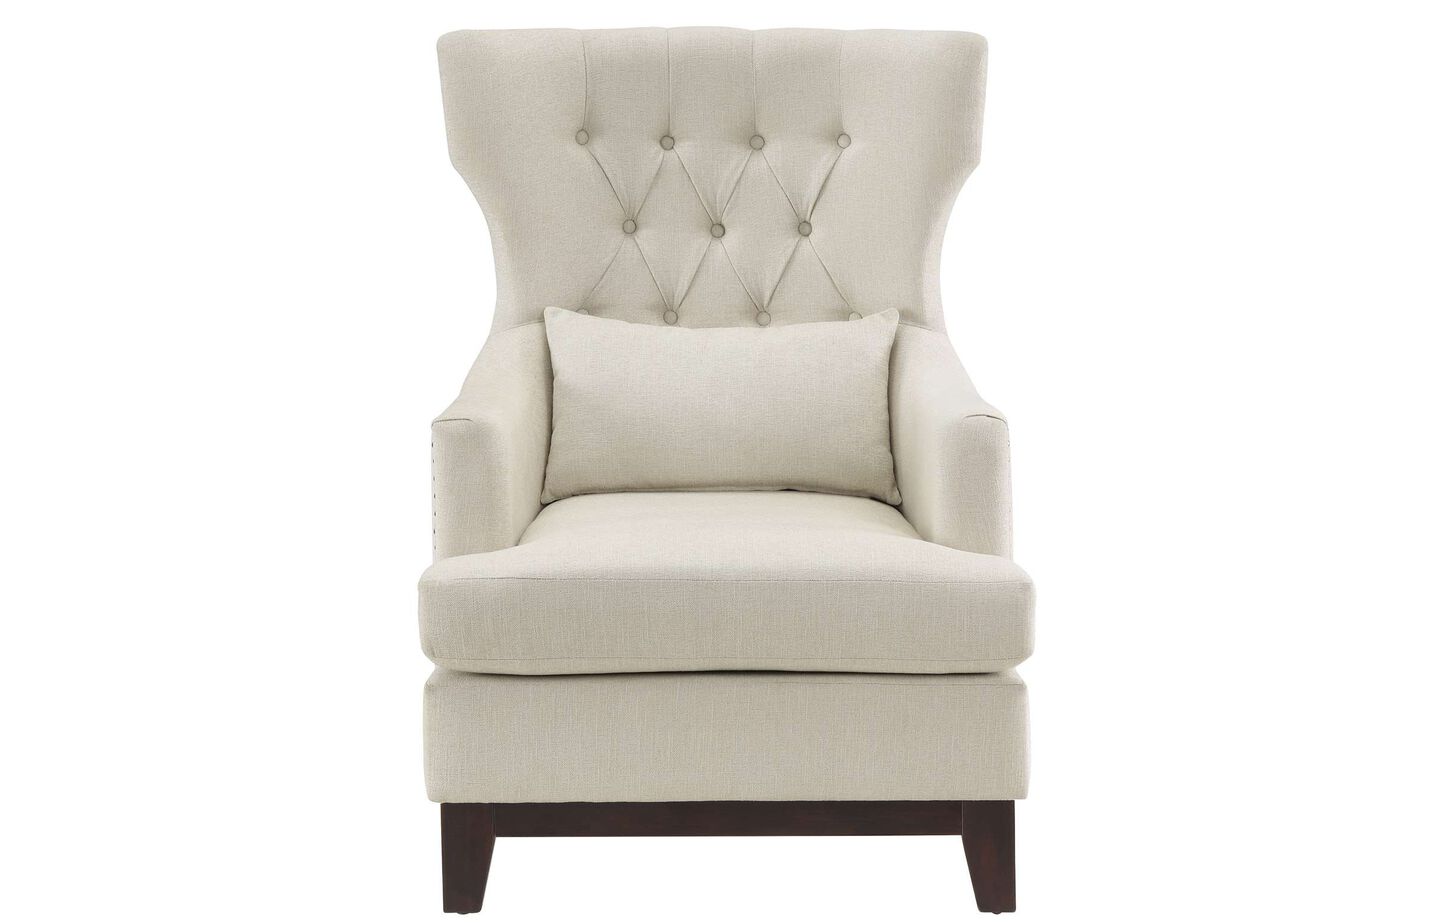 Homelegance Adriano Wing Back Chair image number 4